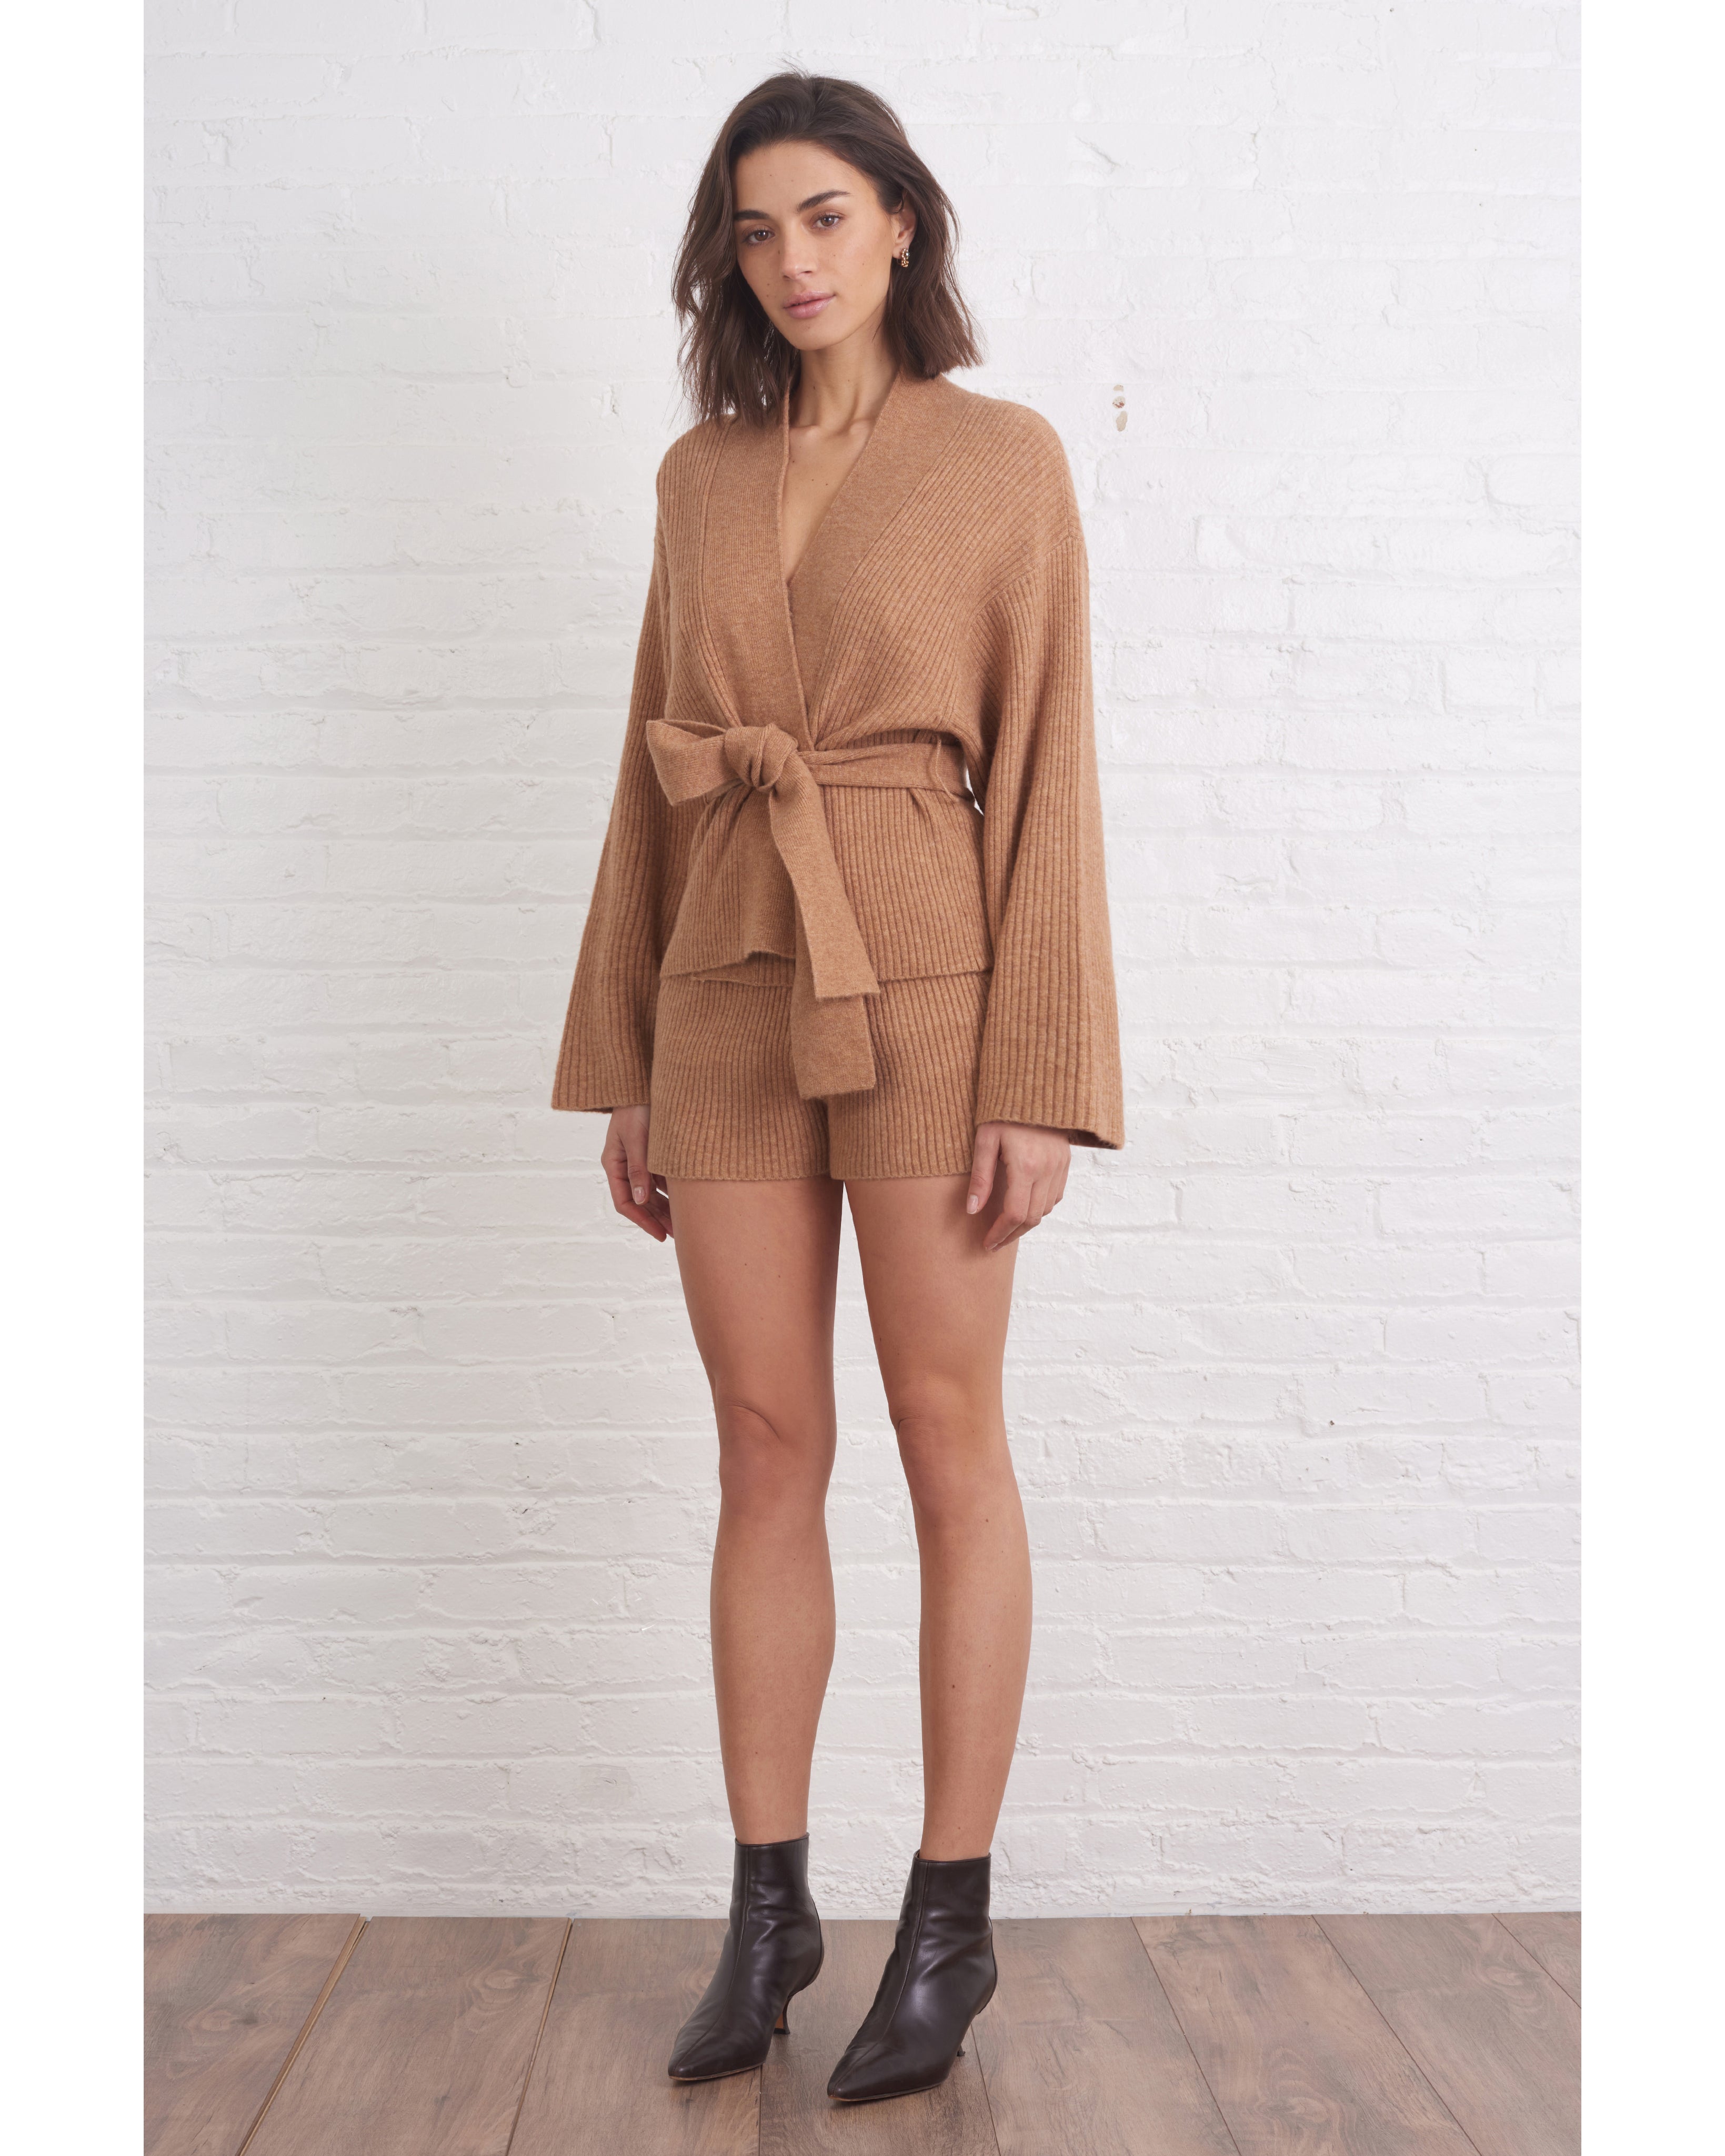 Kyrie Cashmere Blend Cropped Cardigan in Camel